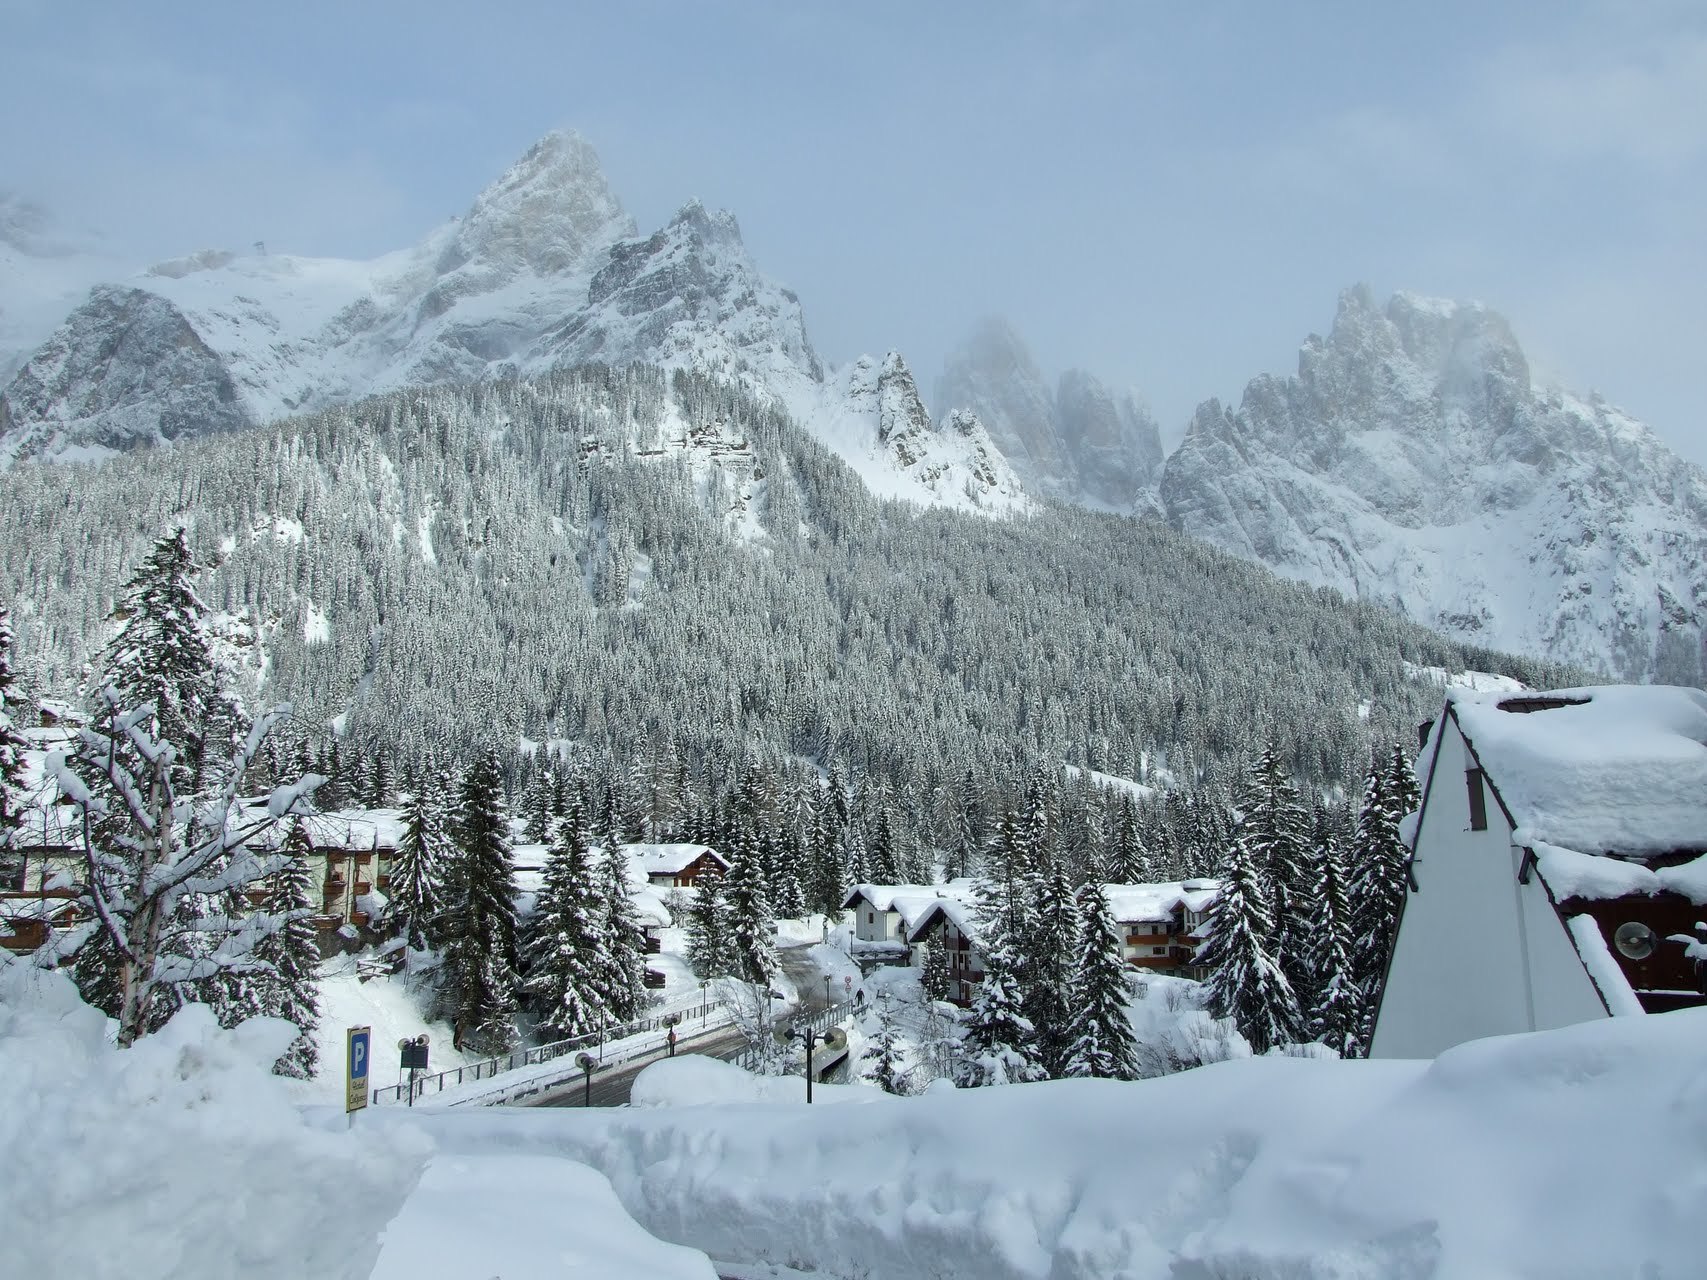 Ski resort of Val di Fassa Italy wallpapers and images   wallpapers